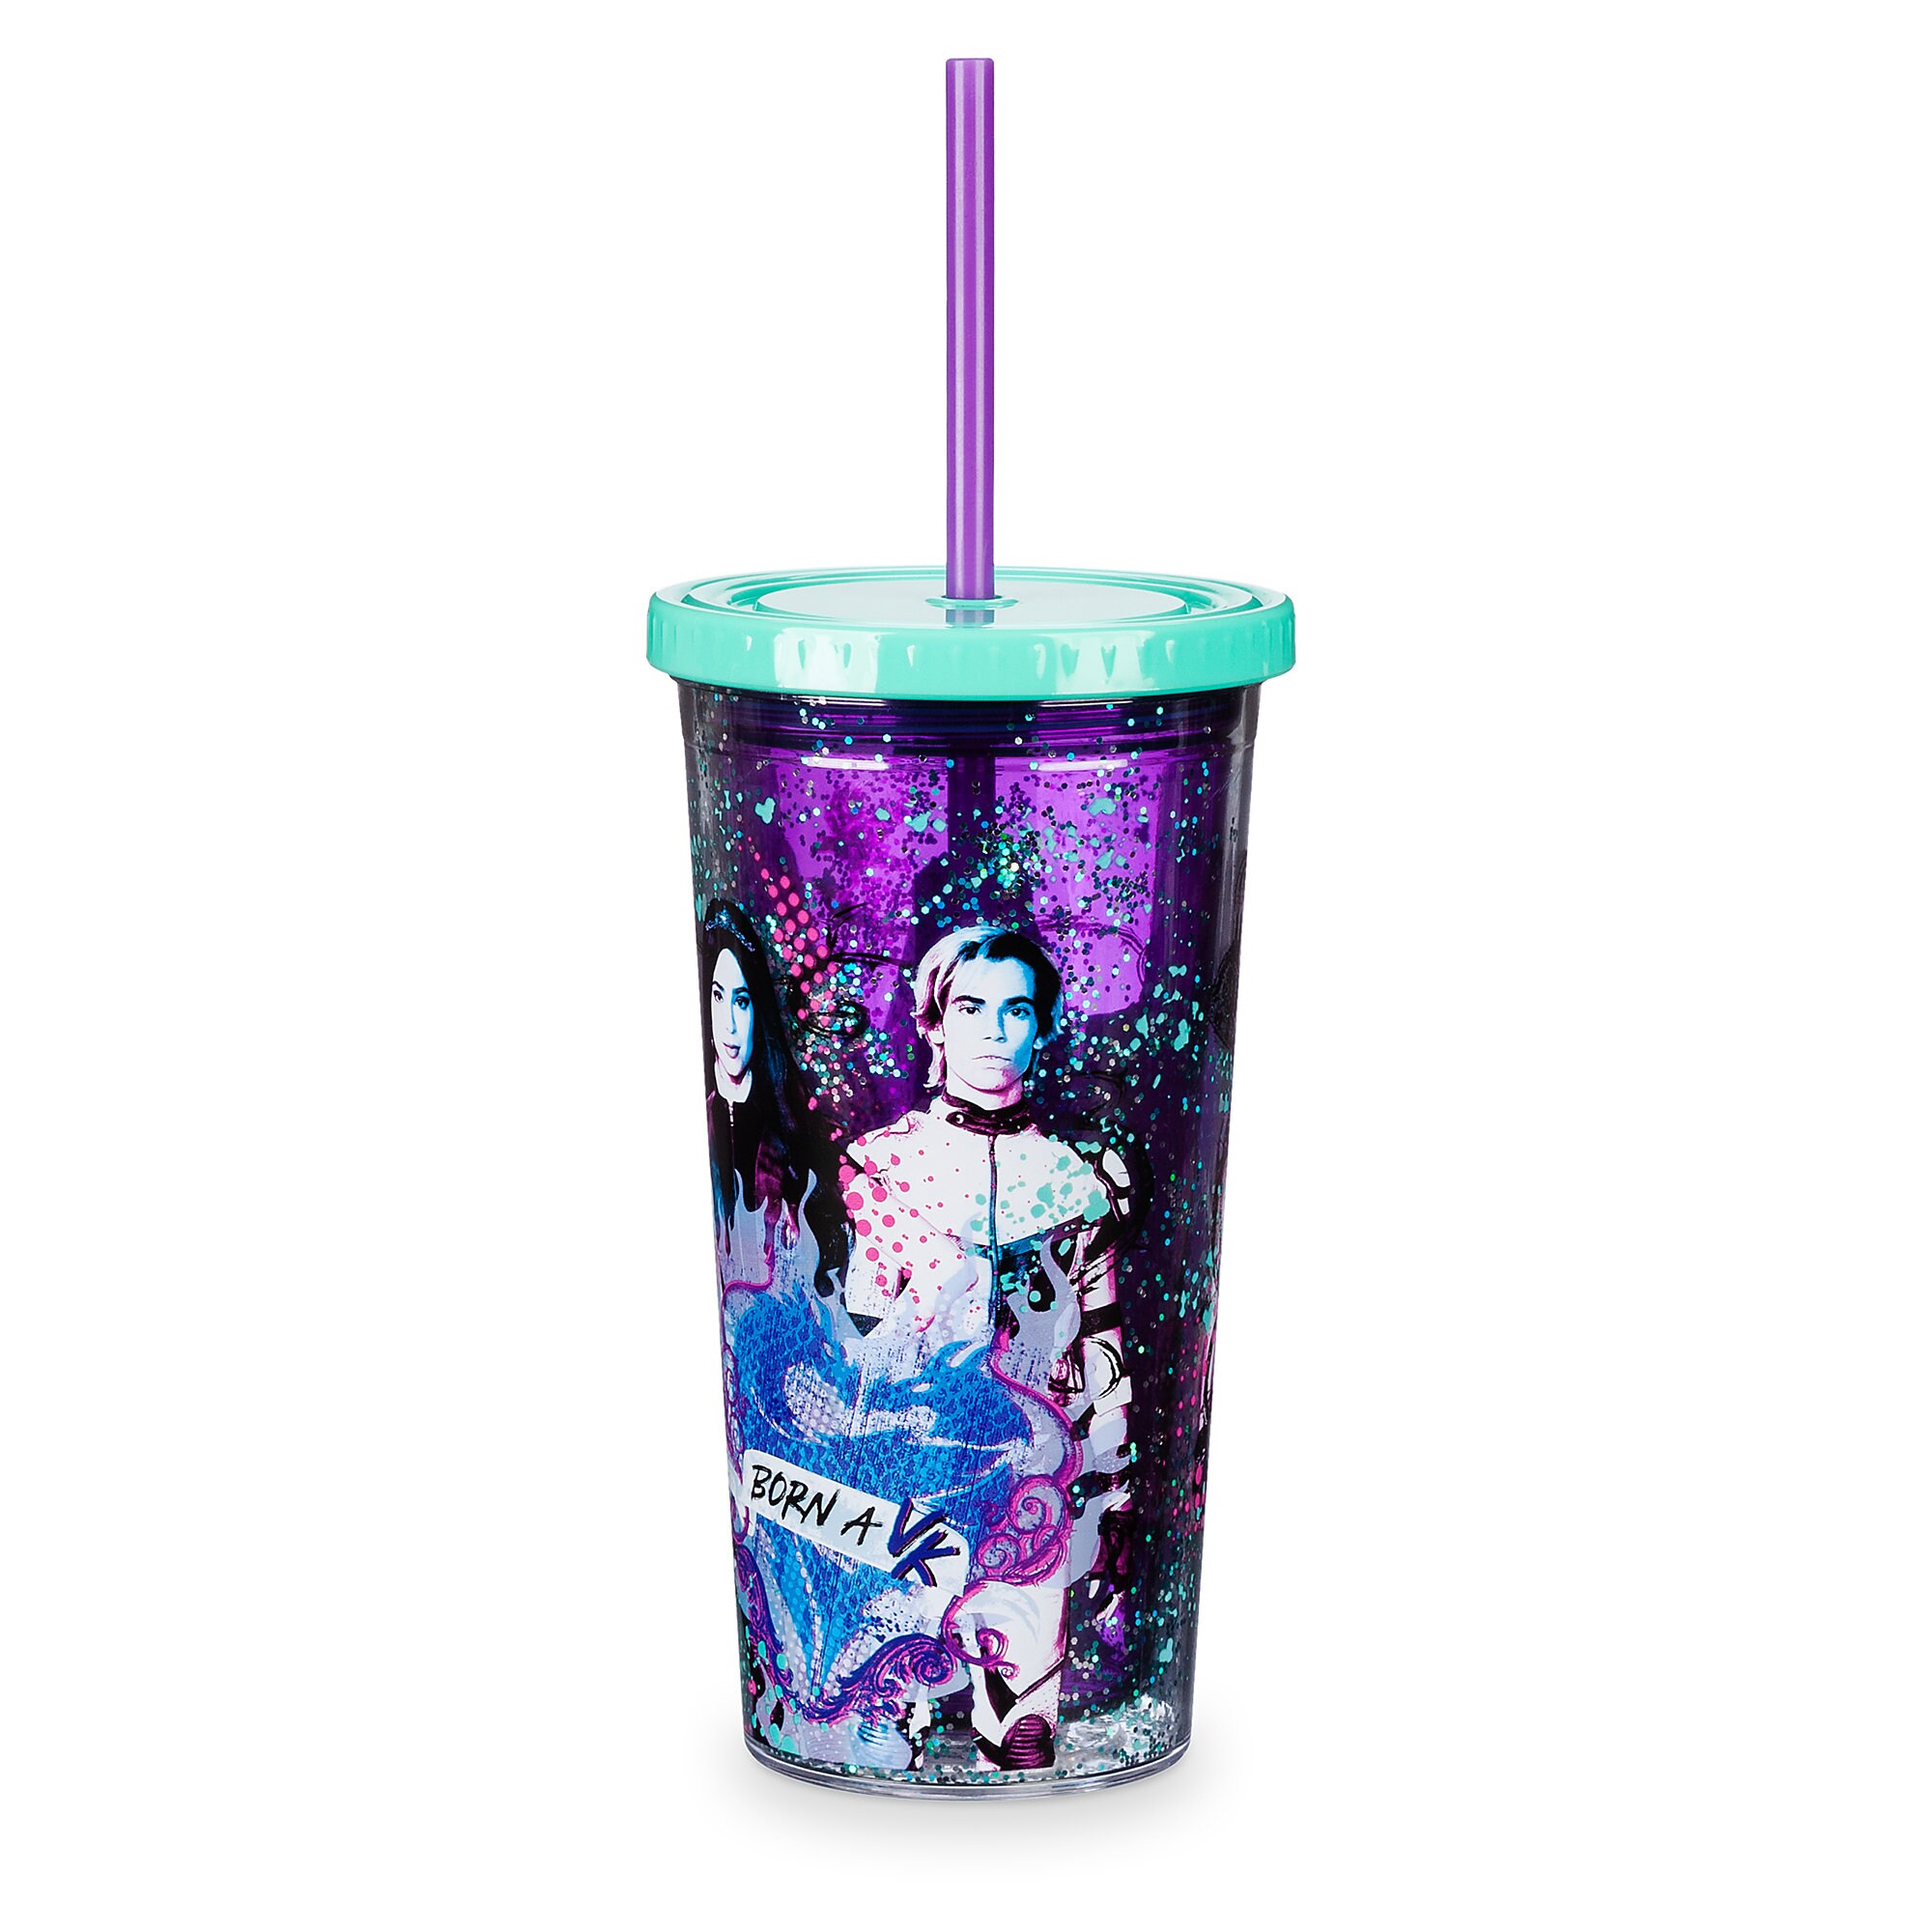 Descendants 3 Tumbler with Straw - Large